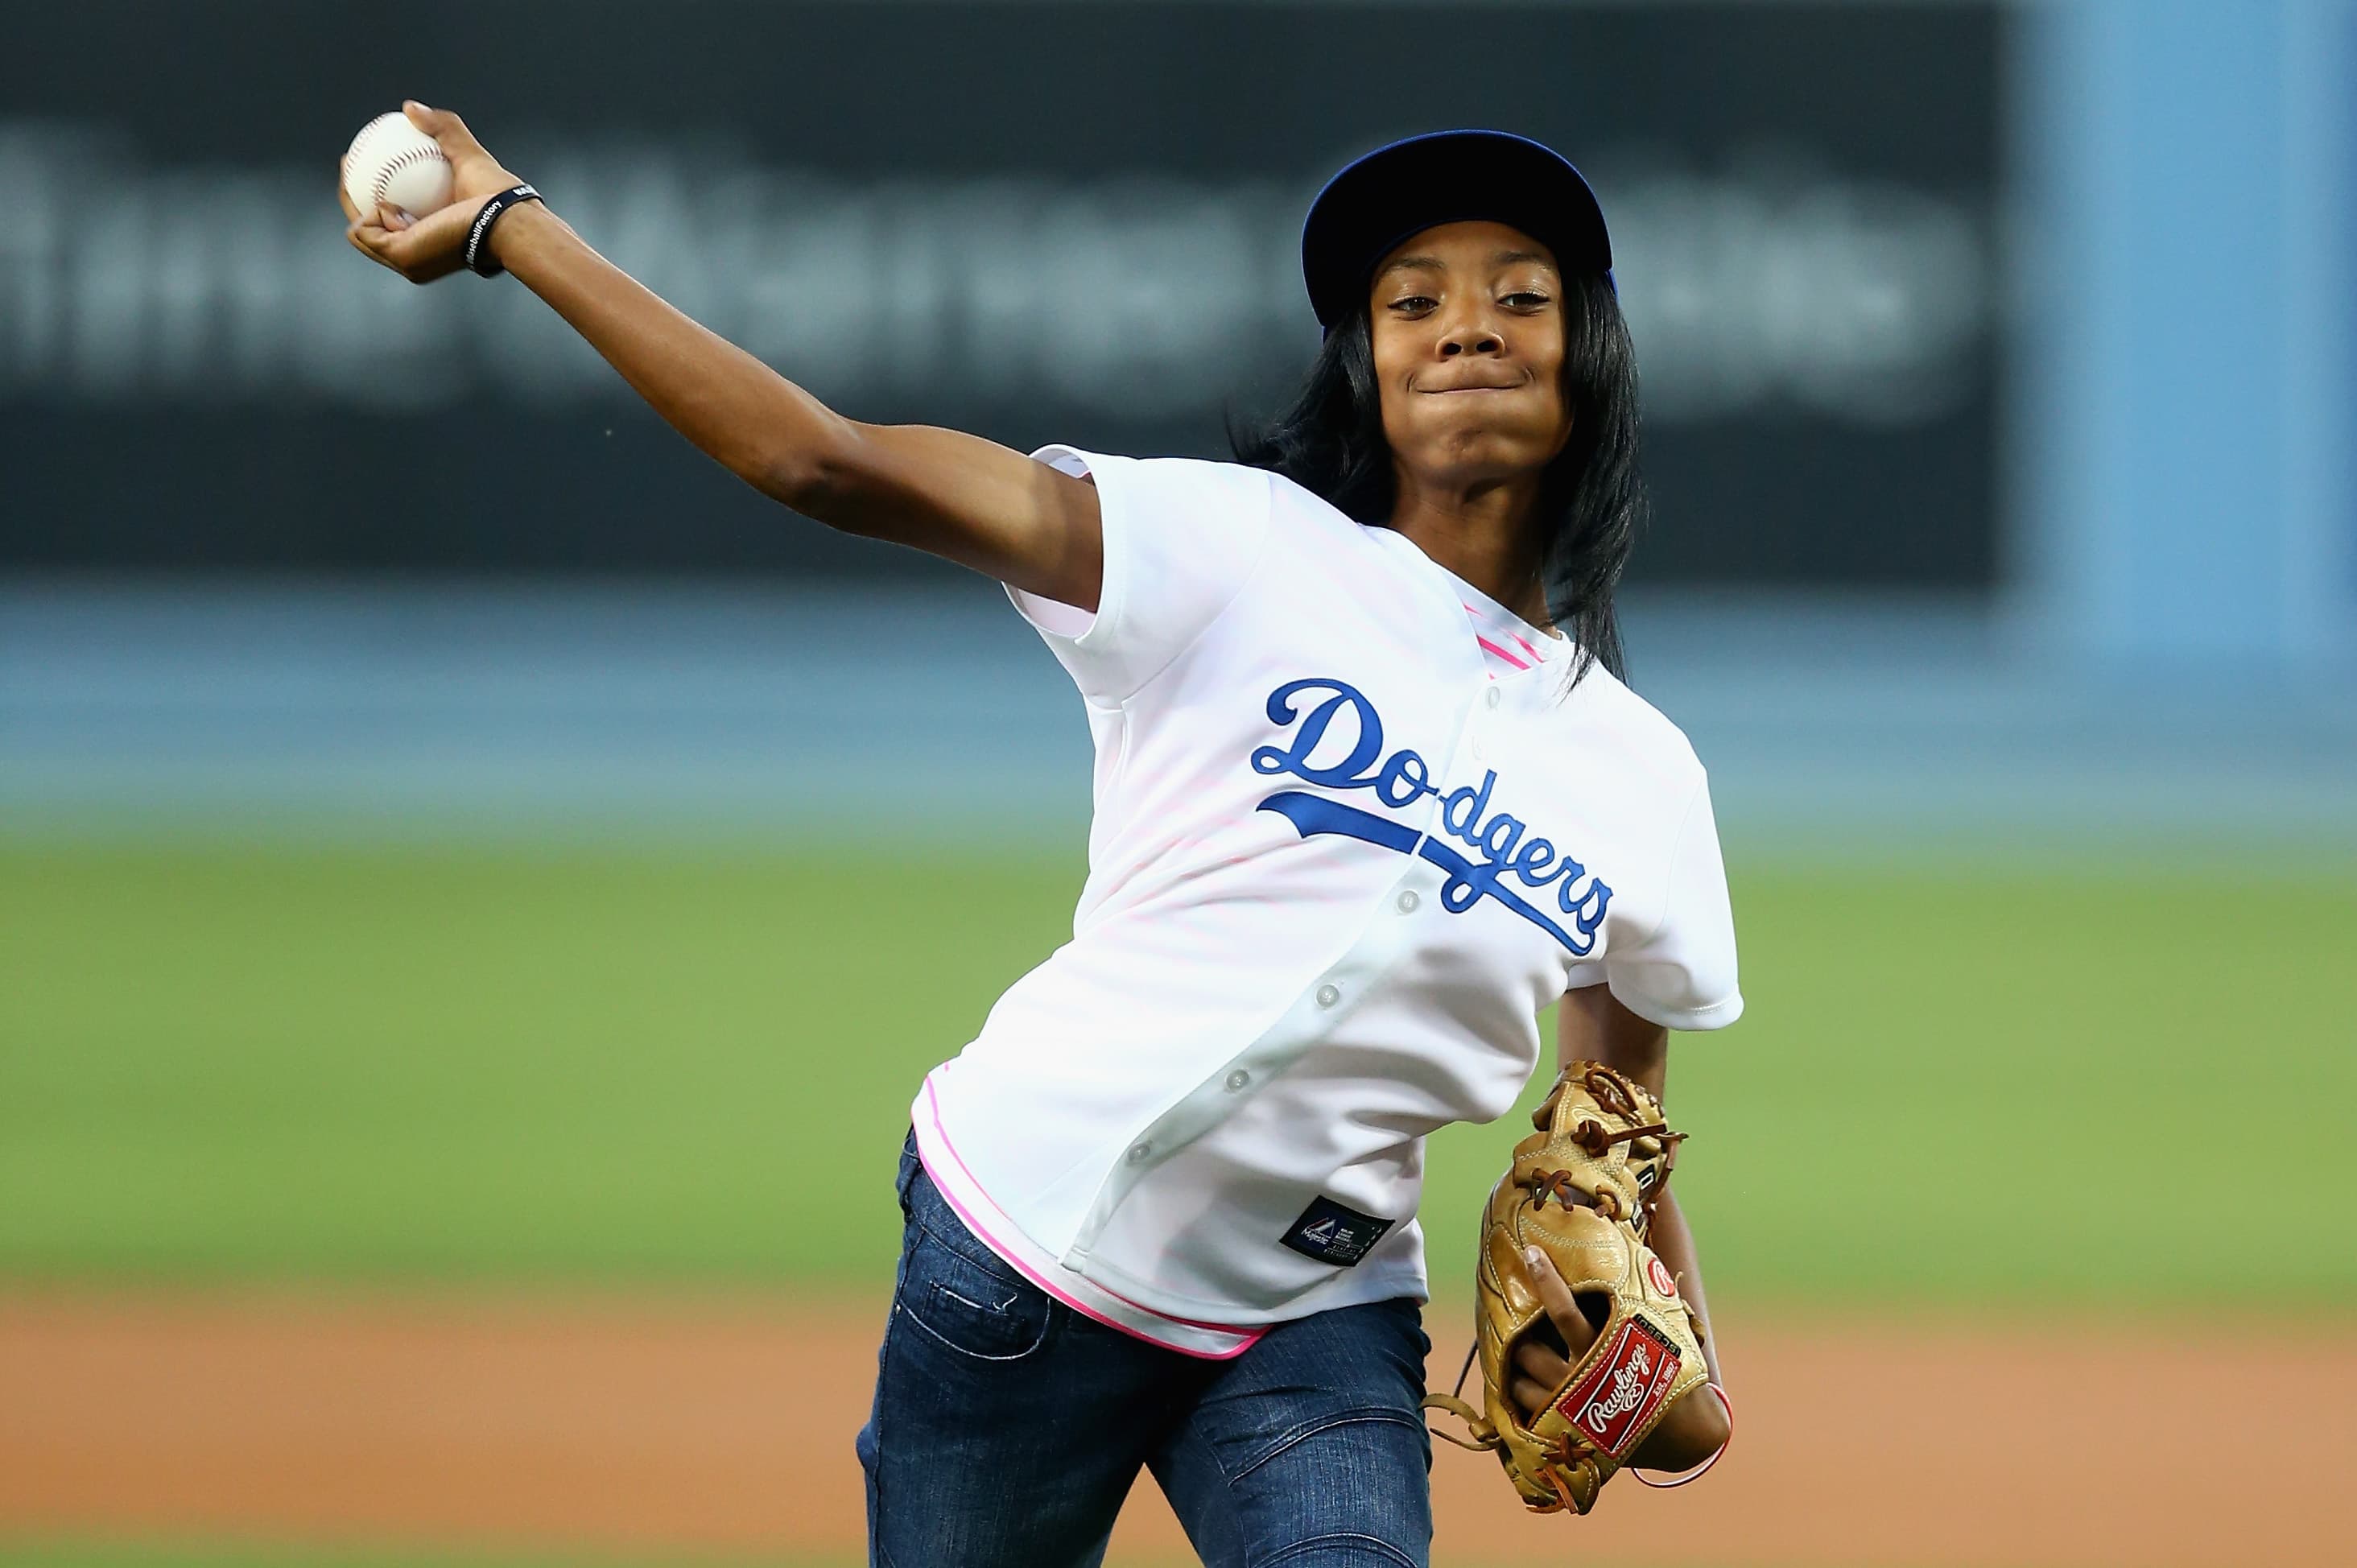 Mo'ne Davis throws out the first pitch at a Dodgers game in 2014. (Jeff Gross/Getty Images)